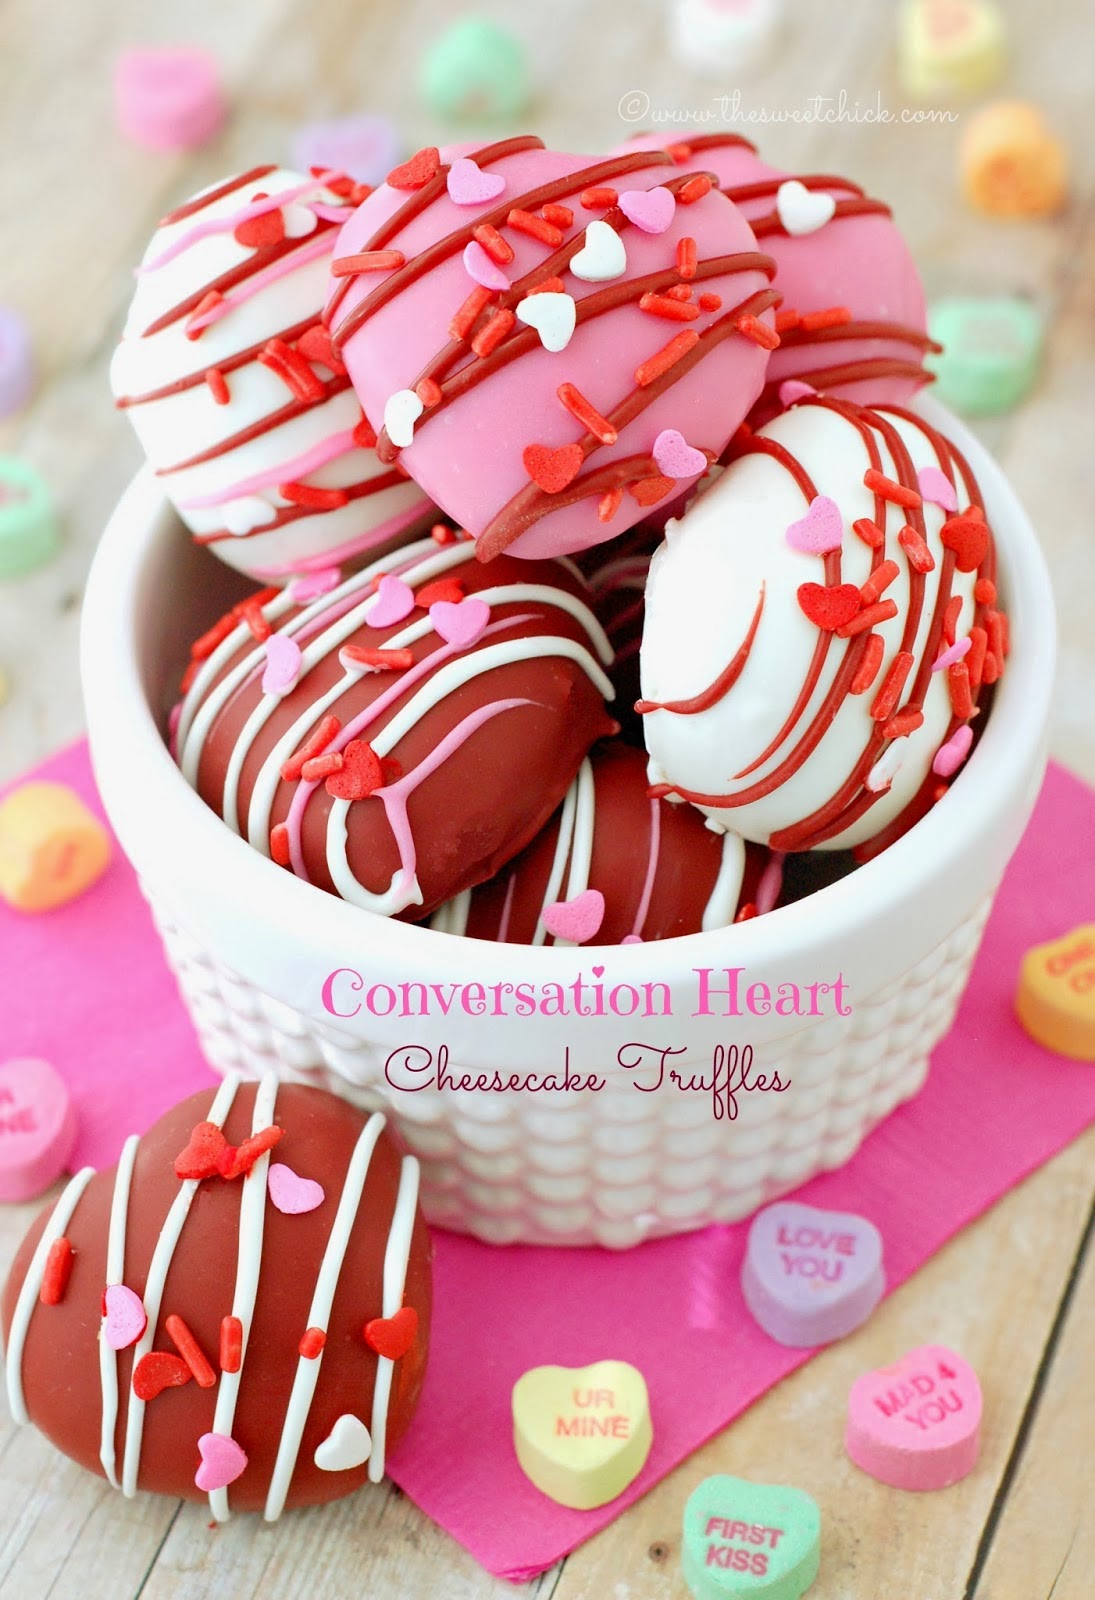 Conversation Heart Cheesecake Truffles by The Sweet Chick